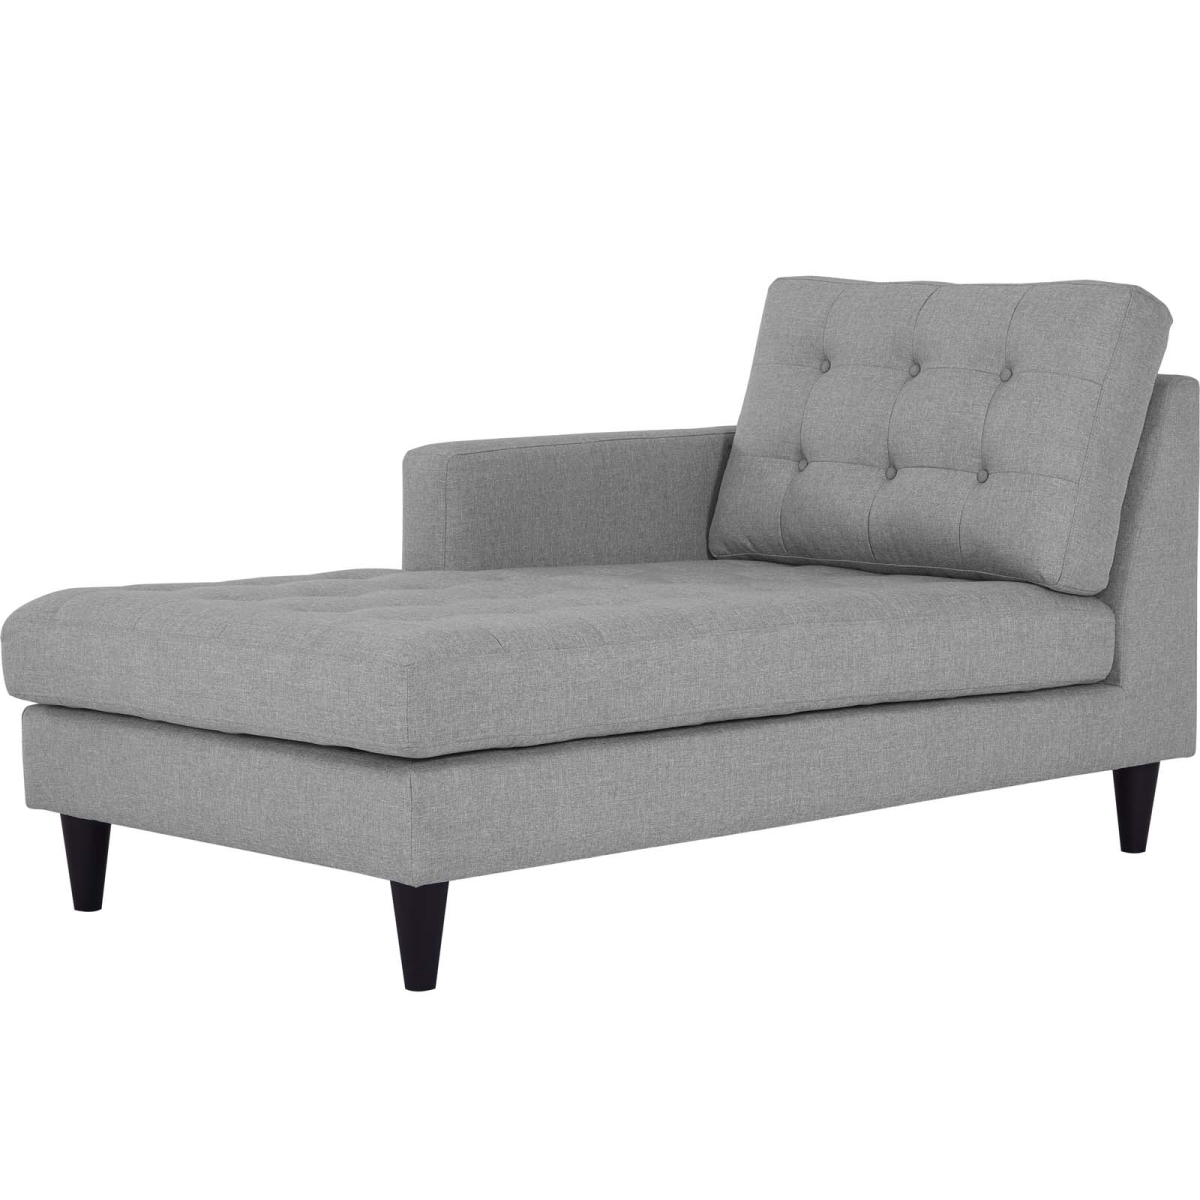 Modway Eei-2596-lgr 35.5 H X 35.0 W X 63.5 L In. Empress Left-arm Upholstered Fabric Chaise, Light Gray